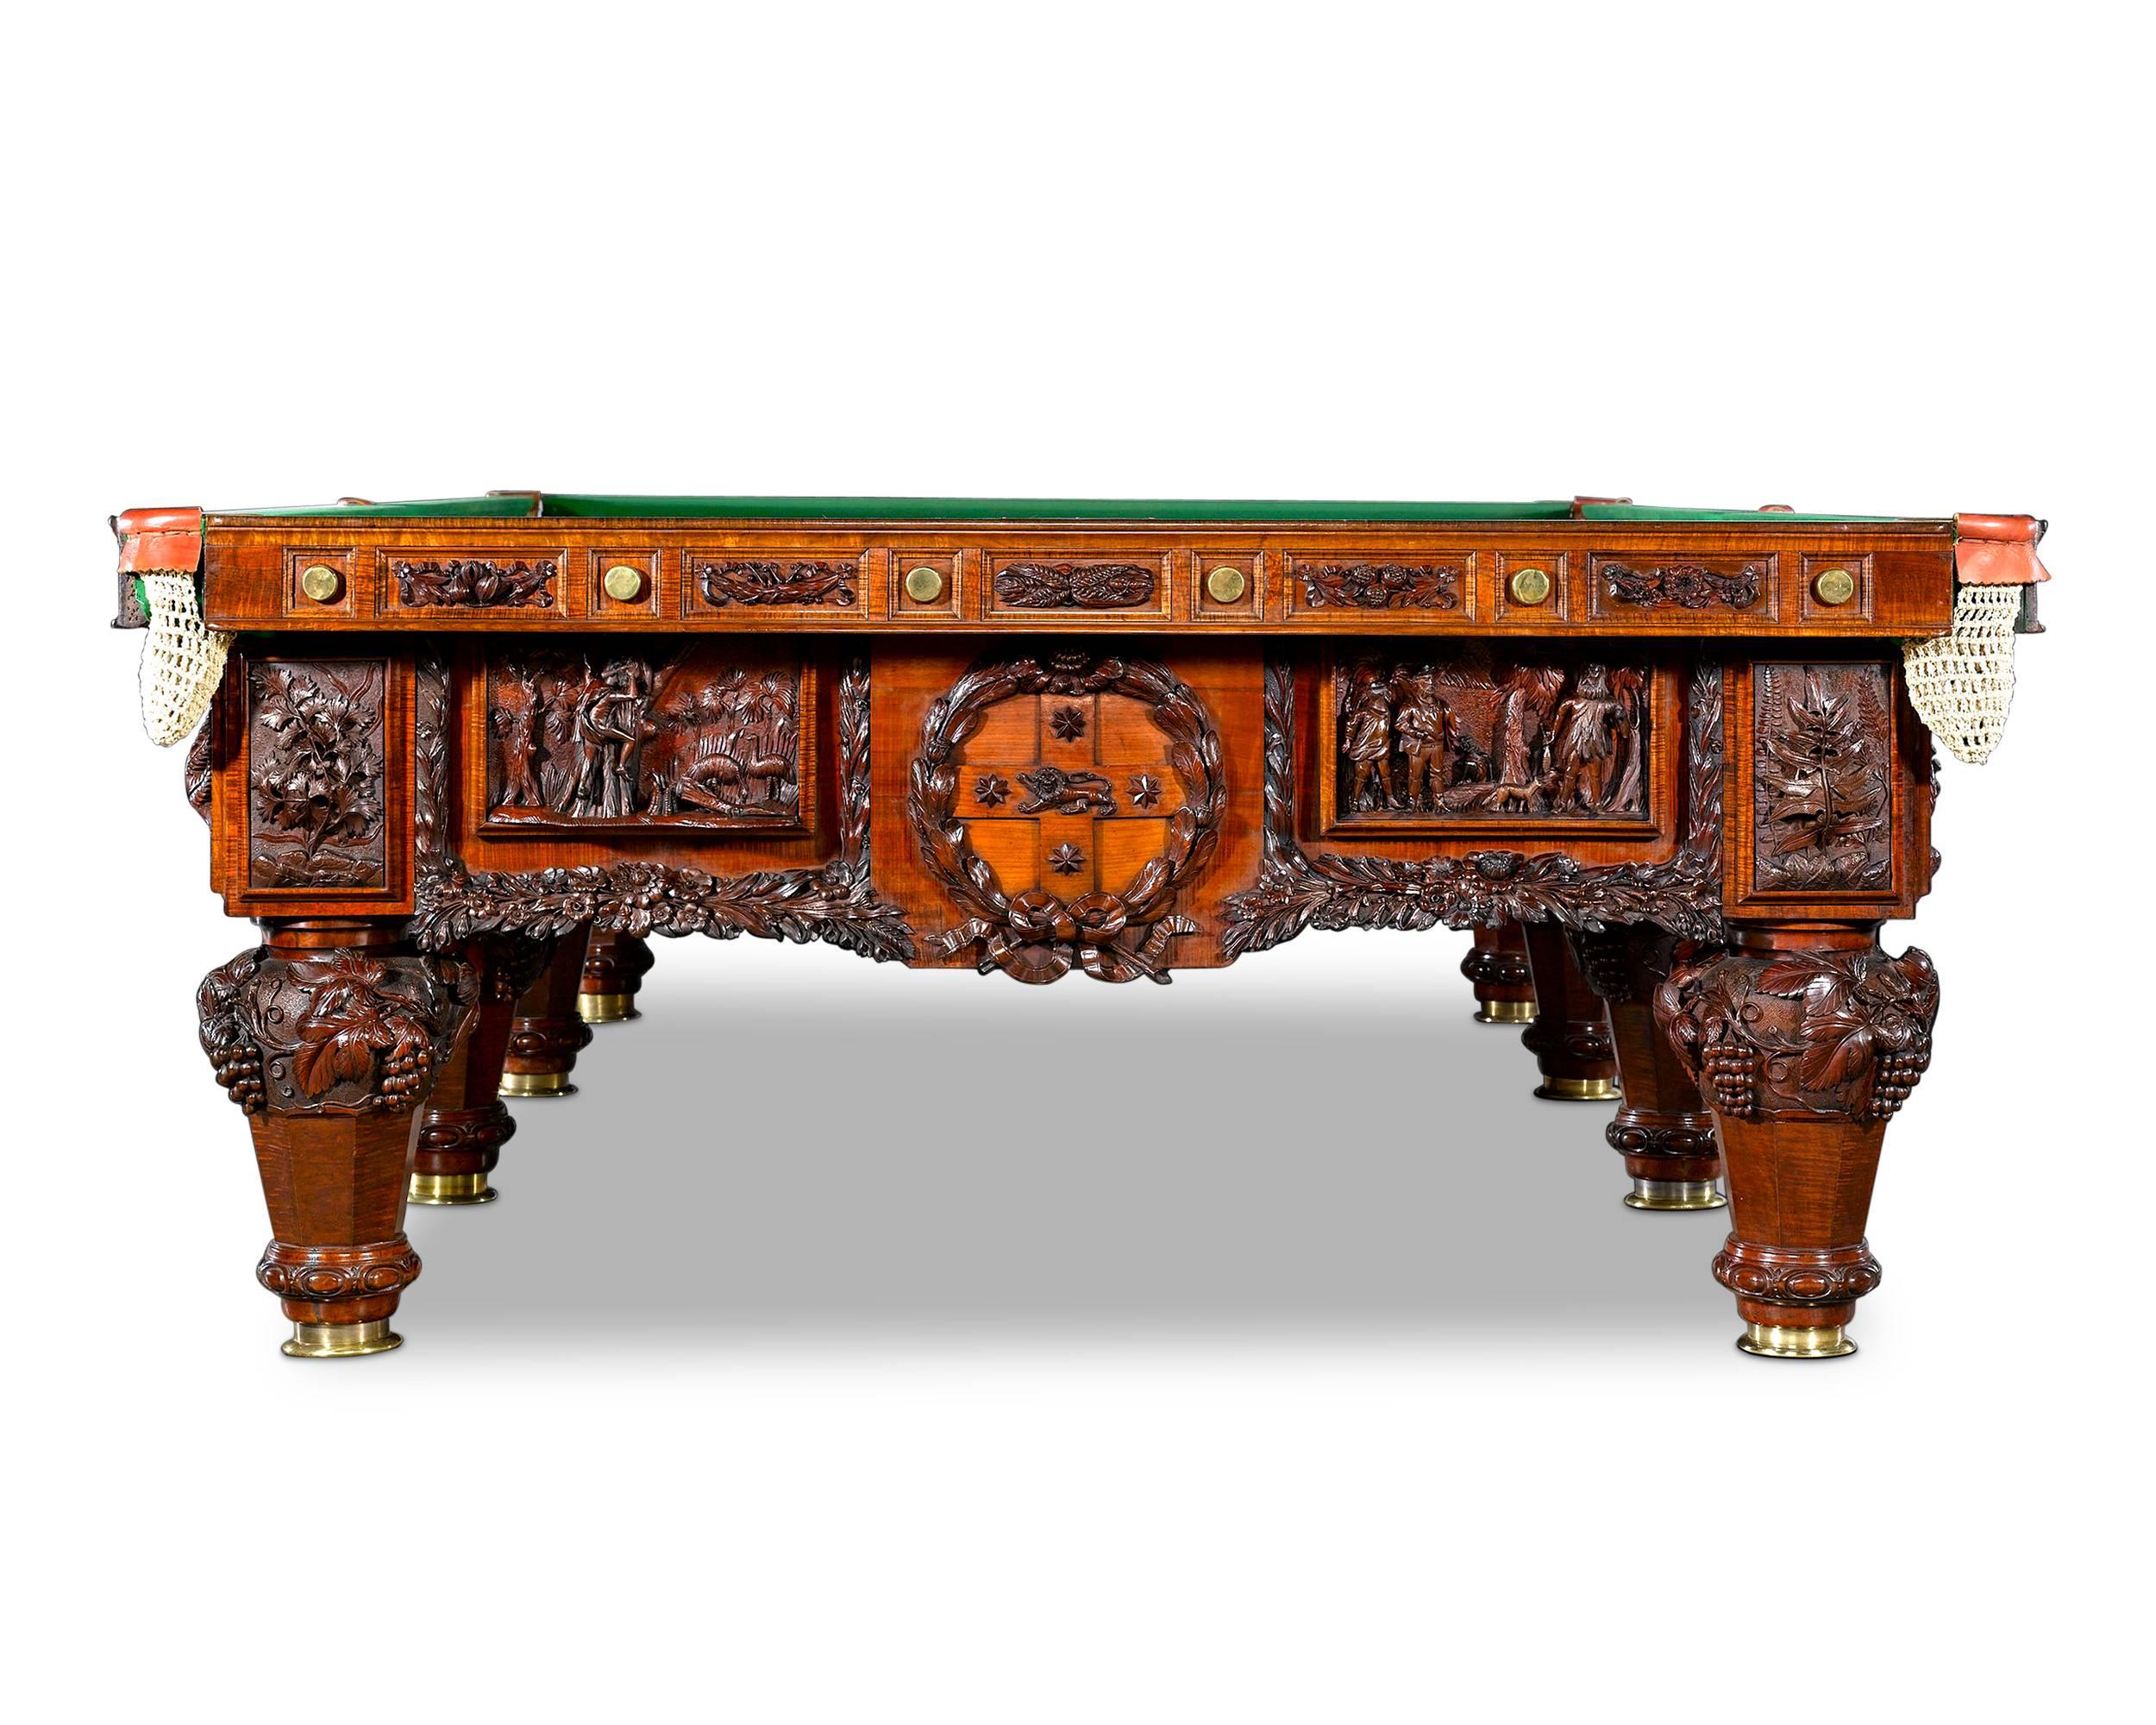 This magnificent, award-winning Australian billiard table is among the most important ever created in the vast British Empire and has an impressive royal provenance. Crafted of beautiful and highly valued Australian blackwood by master carver George